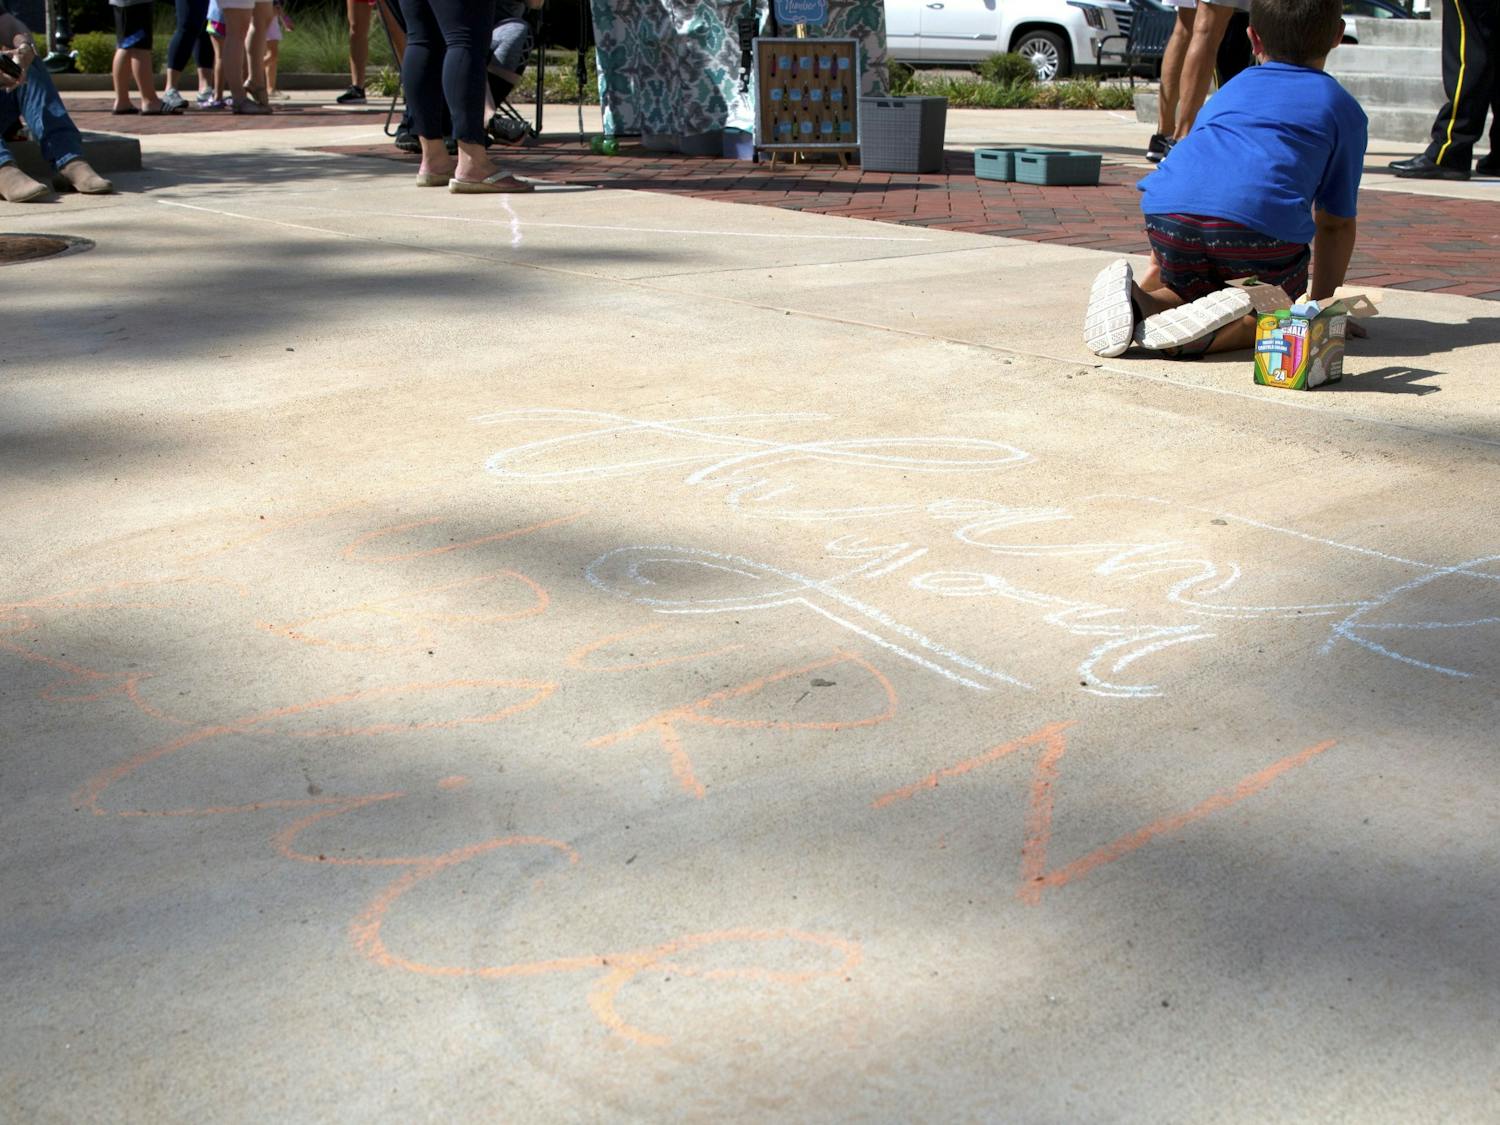 Cookies, Chalk, and Cops Event